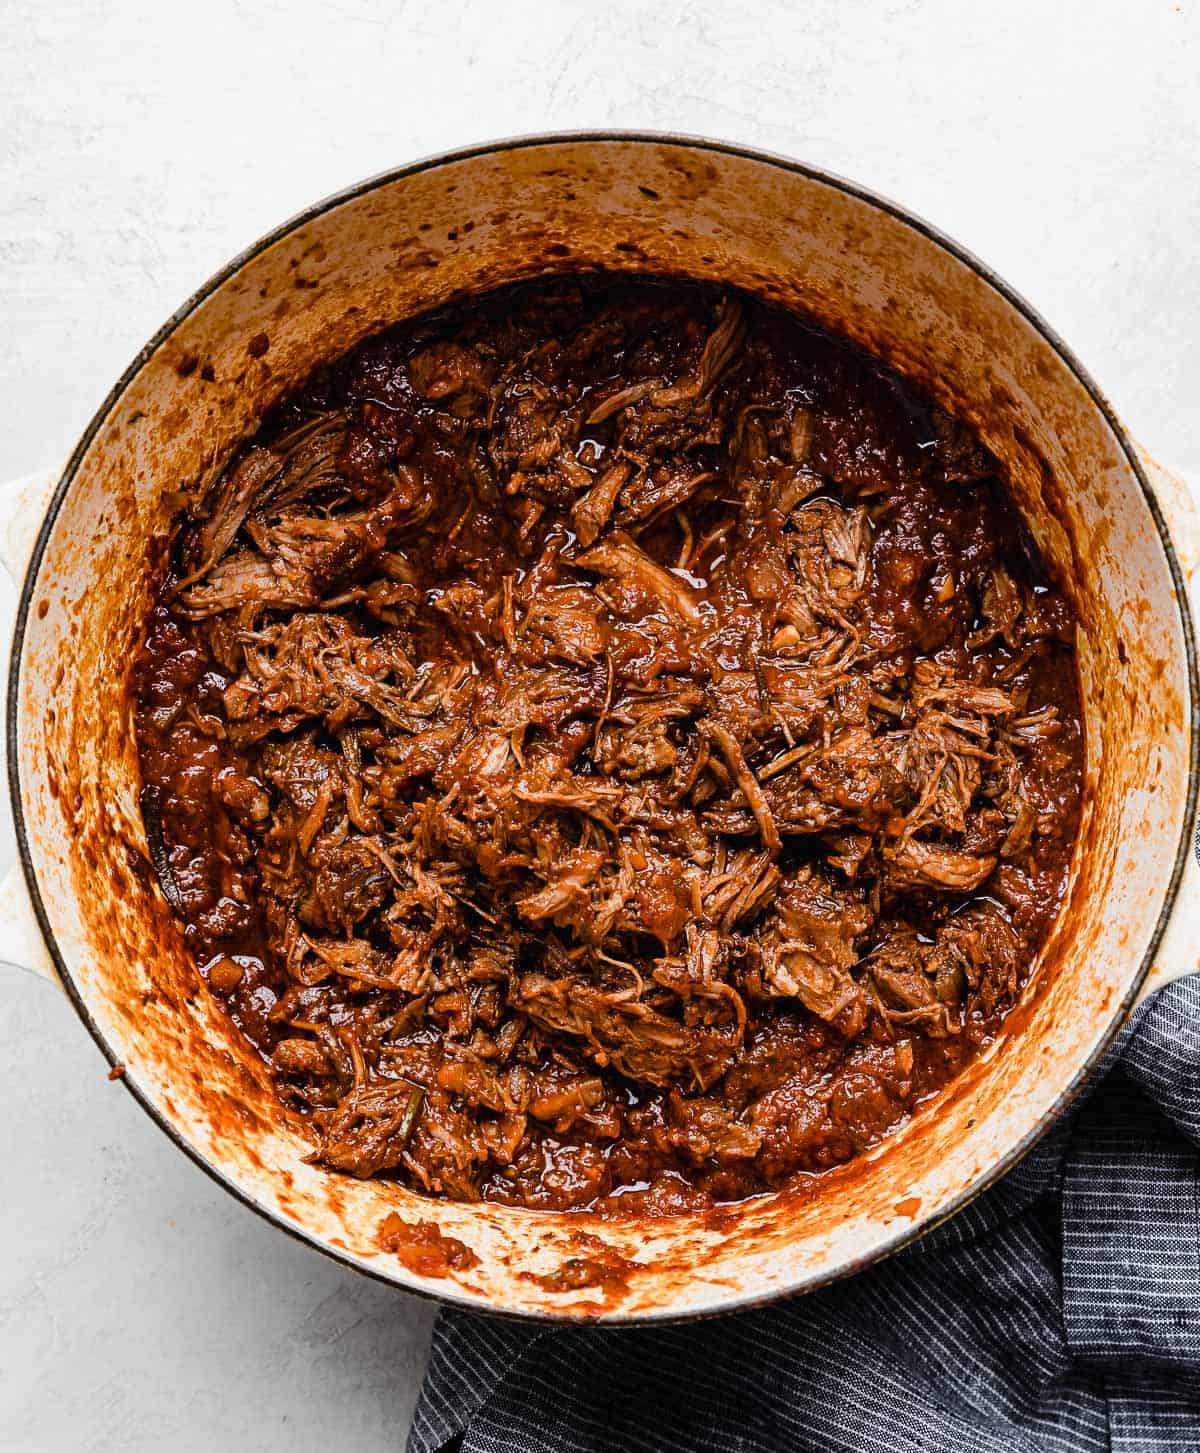 A shredded beef Ragu sauce in a white pot on a white background.